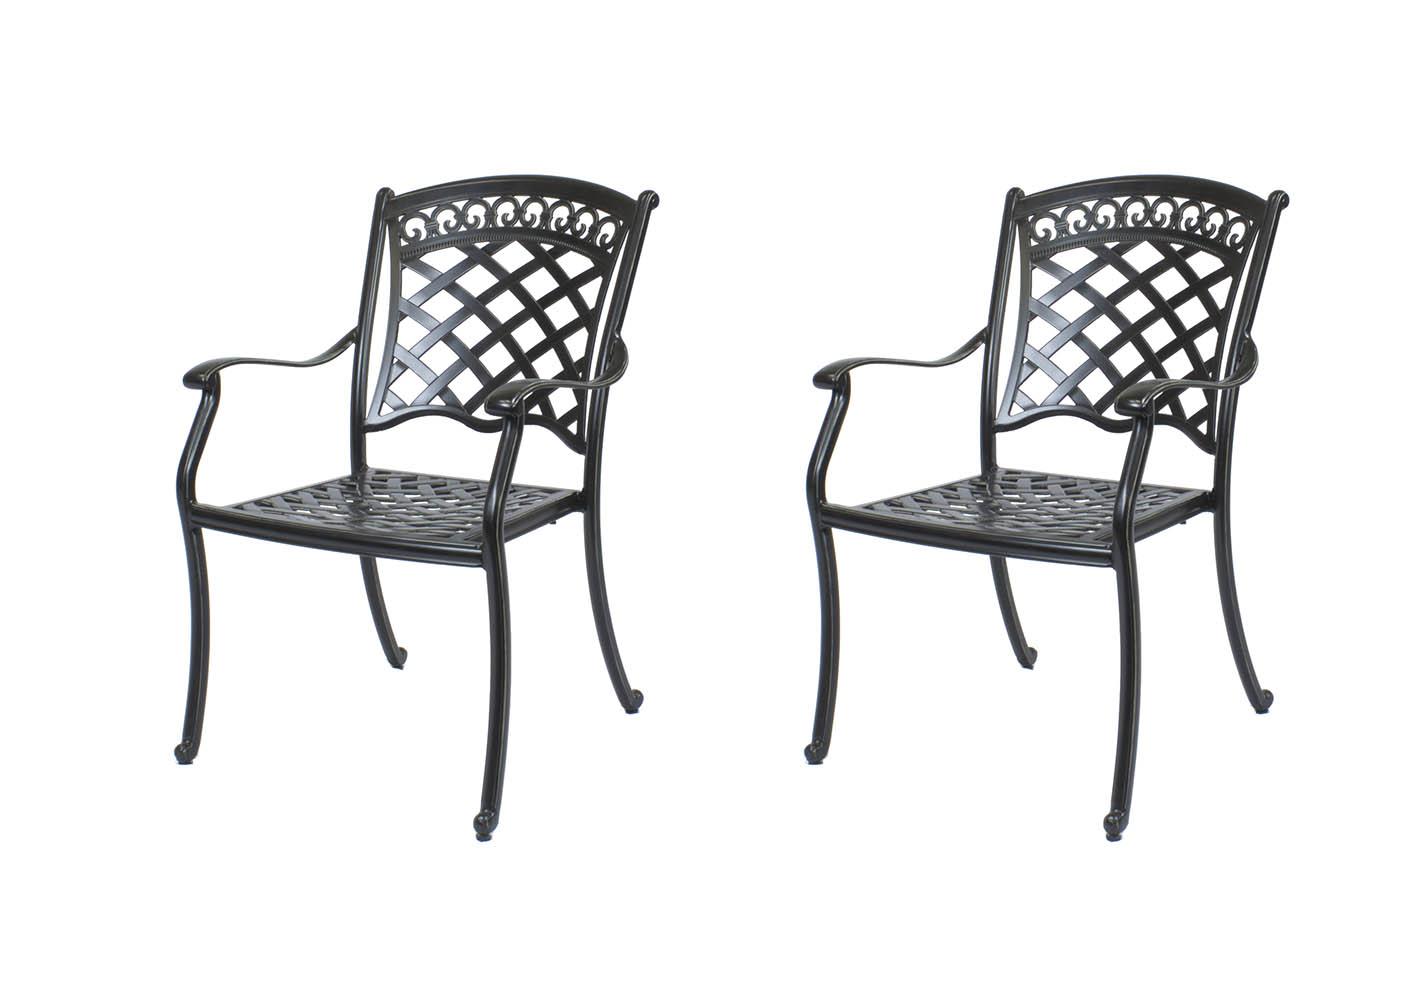 

    
St. Tropez Cast Alumnium Fully Welded Dining Chair  Set of 4 by CaliPatio SPECIAL ORDER
